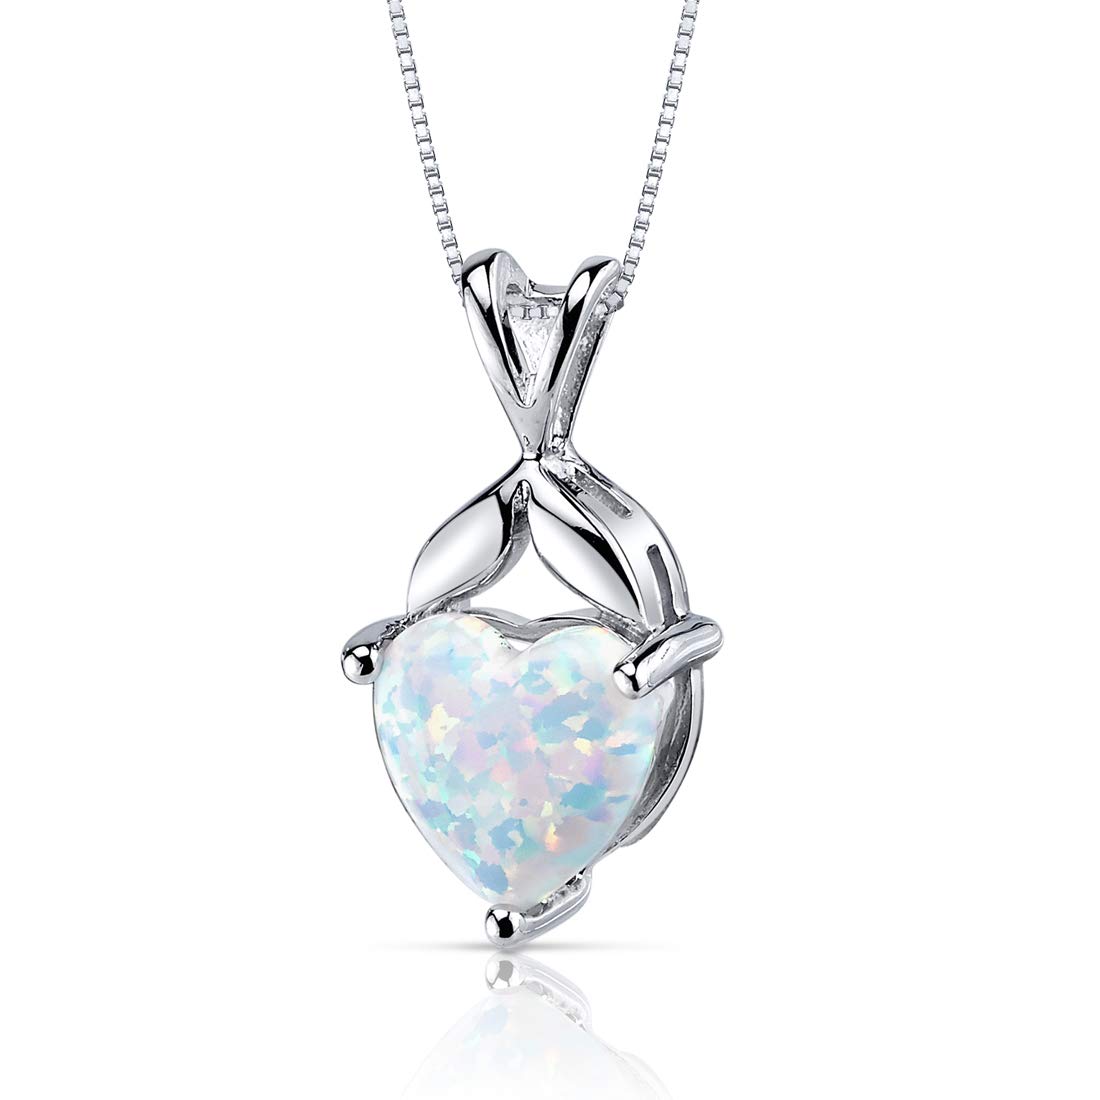 Peora Created White Fire Opal Pendant Necklace 925 Sterling Silver, Classic Solitaire, 2.50 Carats Heart Shape 9mm with 18 inch Chain